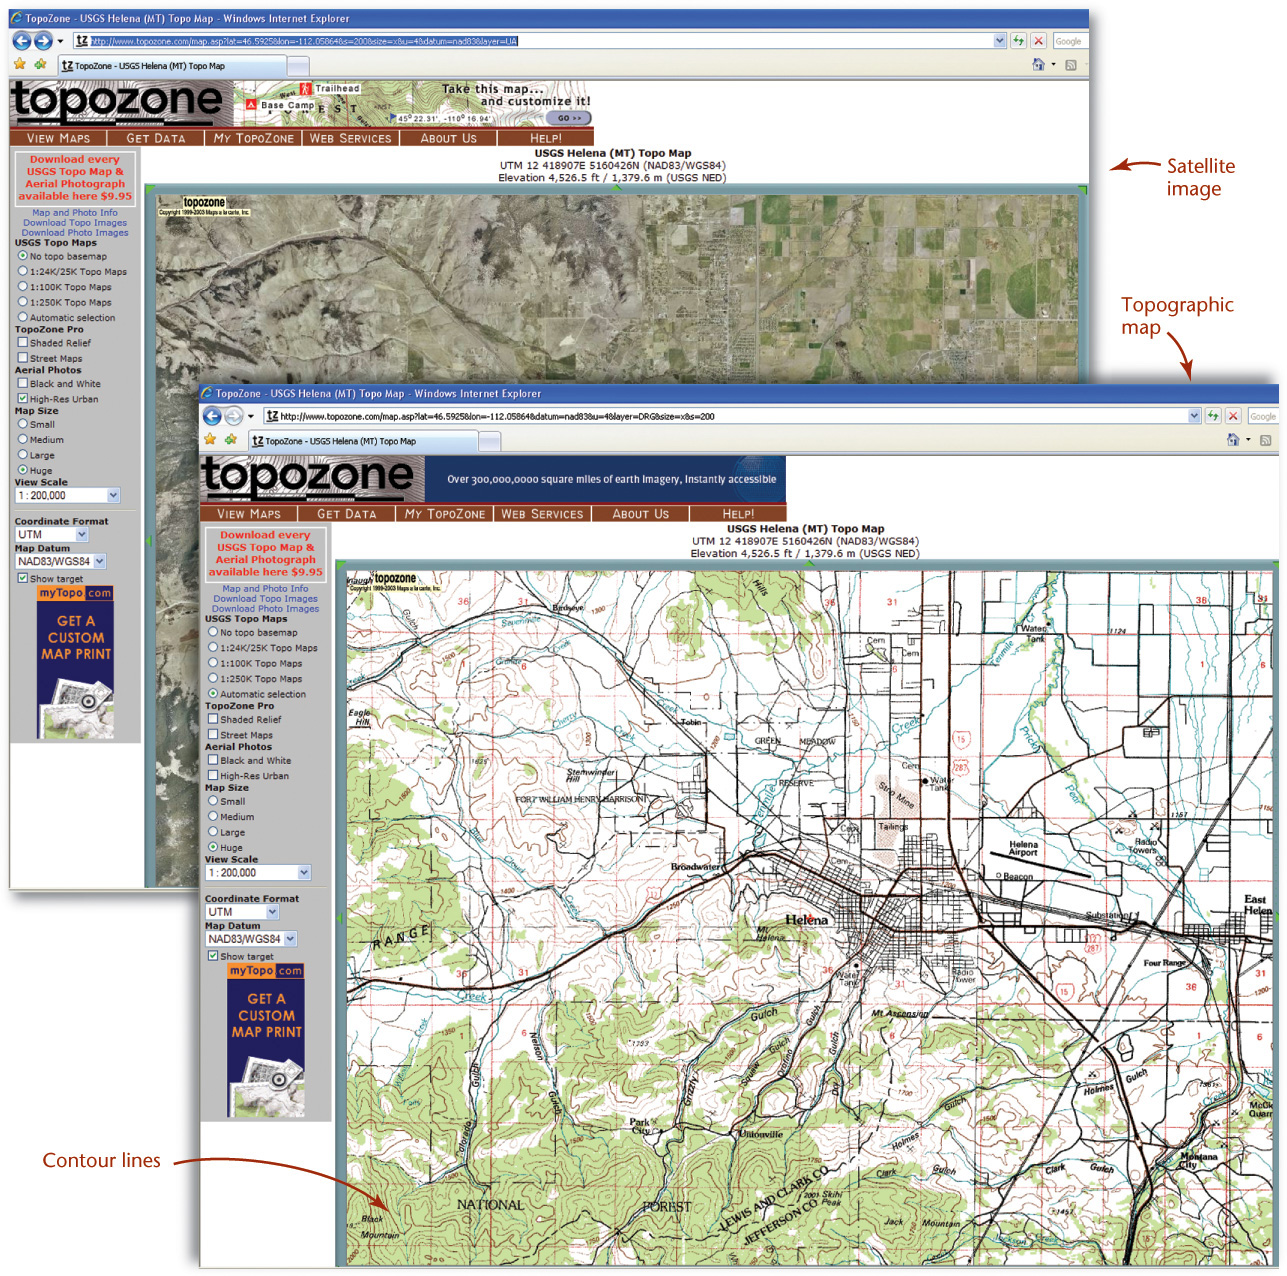 Two screenshots of TopoZone website, overlapping one another, shows the satellite image and topographic map with contour lines of a region.